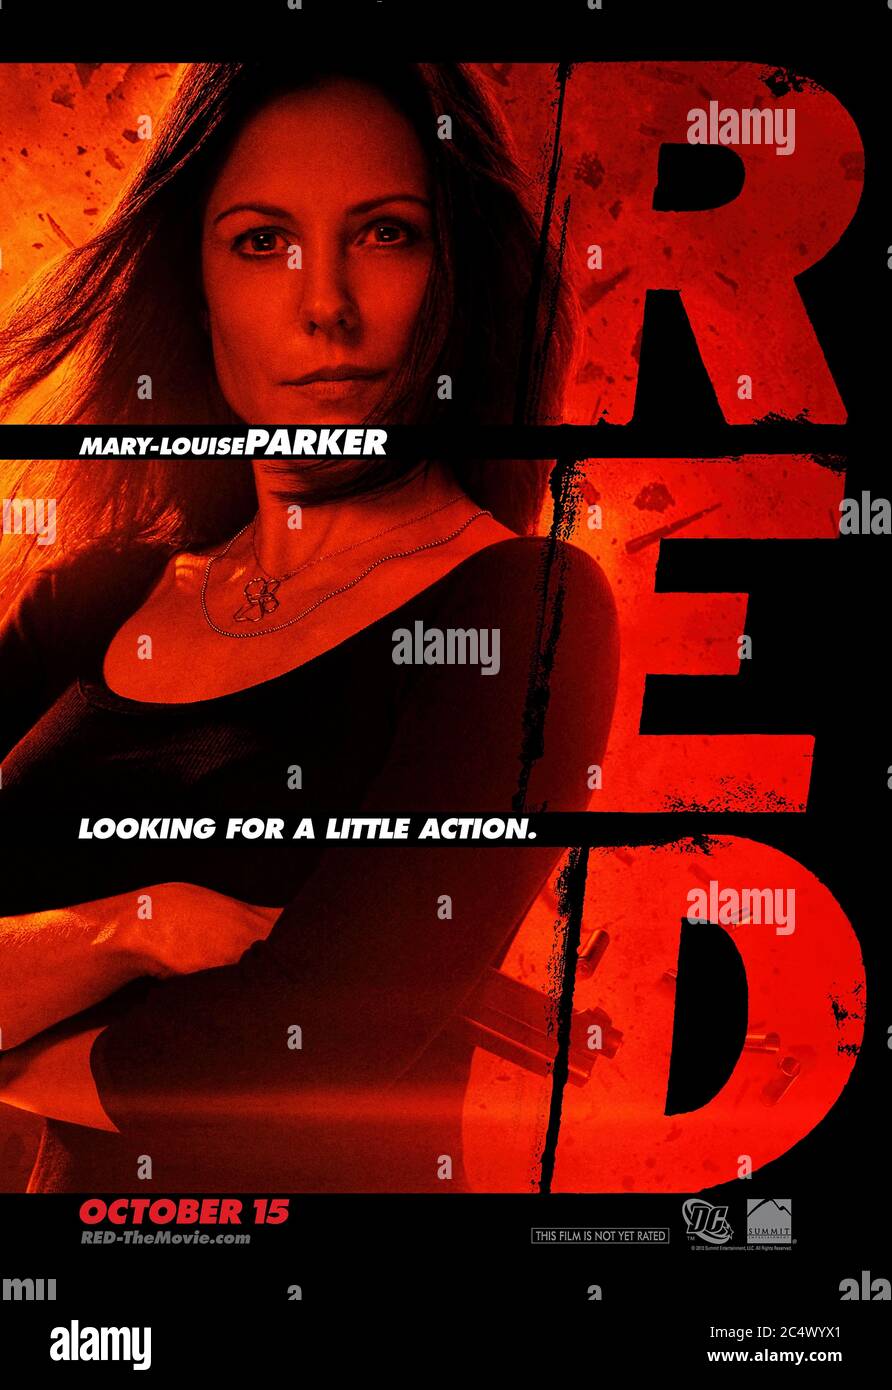 RED (2010) directed by Robert Schwentke, 'R.E.D.' - Retired Extremely Dangerous, based on the DC Comic book. and starring Mary-Louise Parker as Sarah Ross. Stock Photo